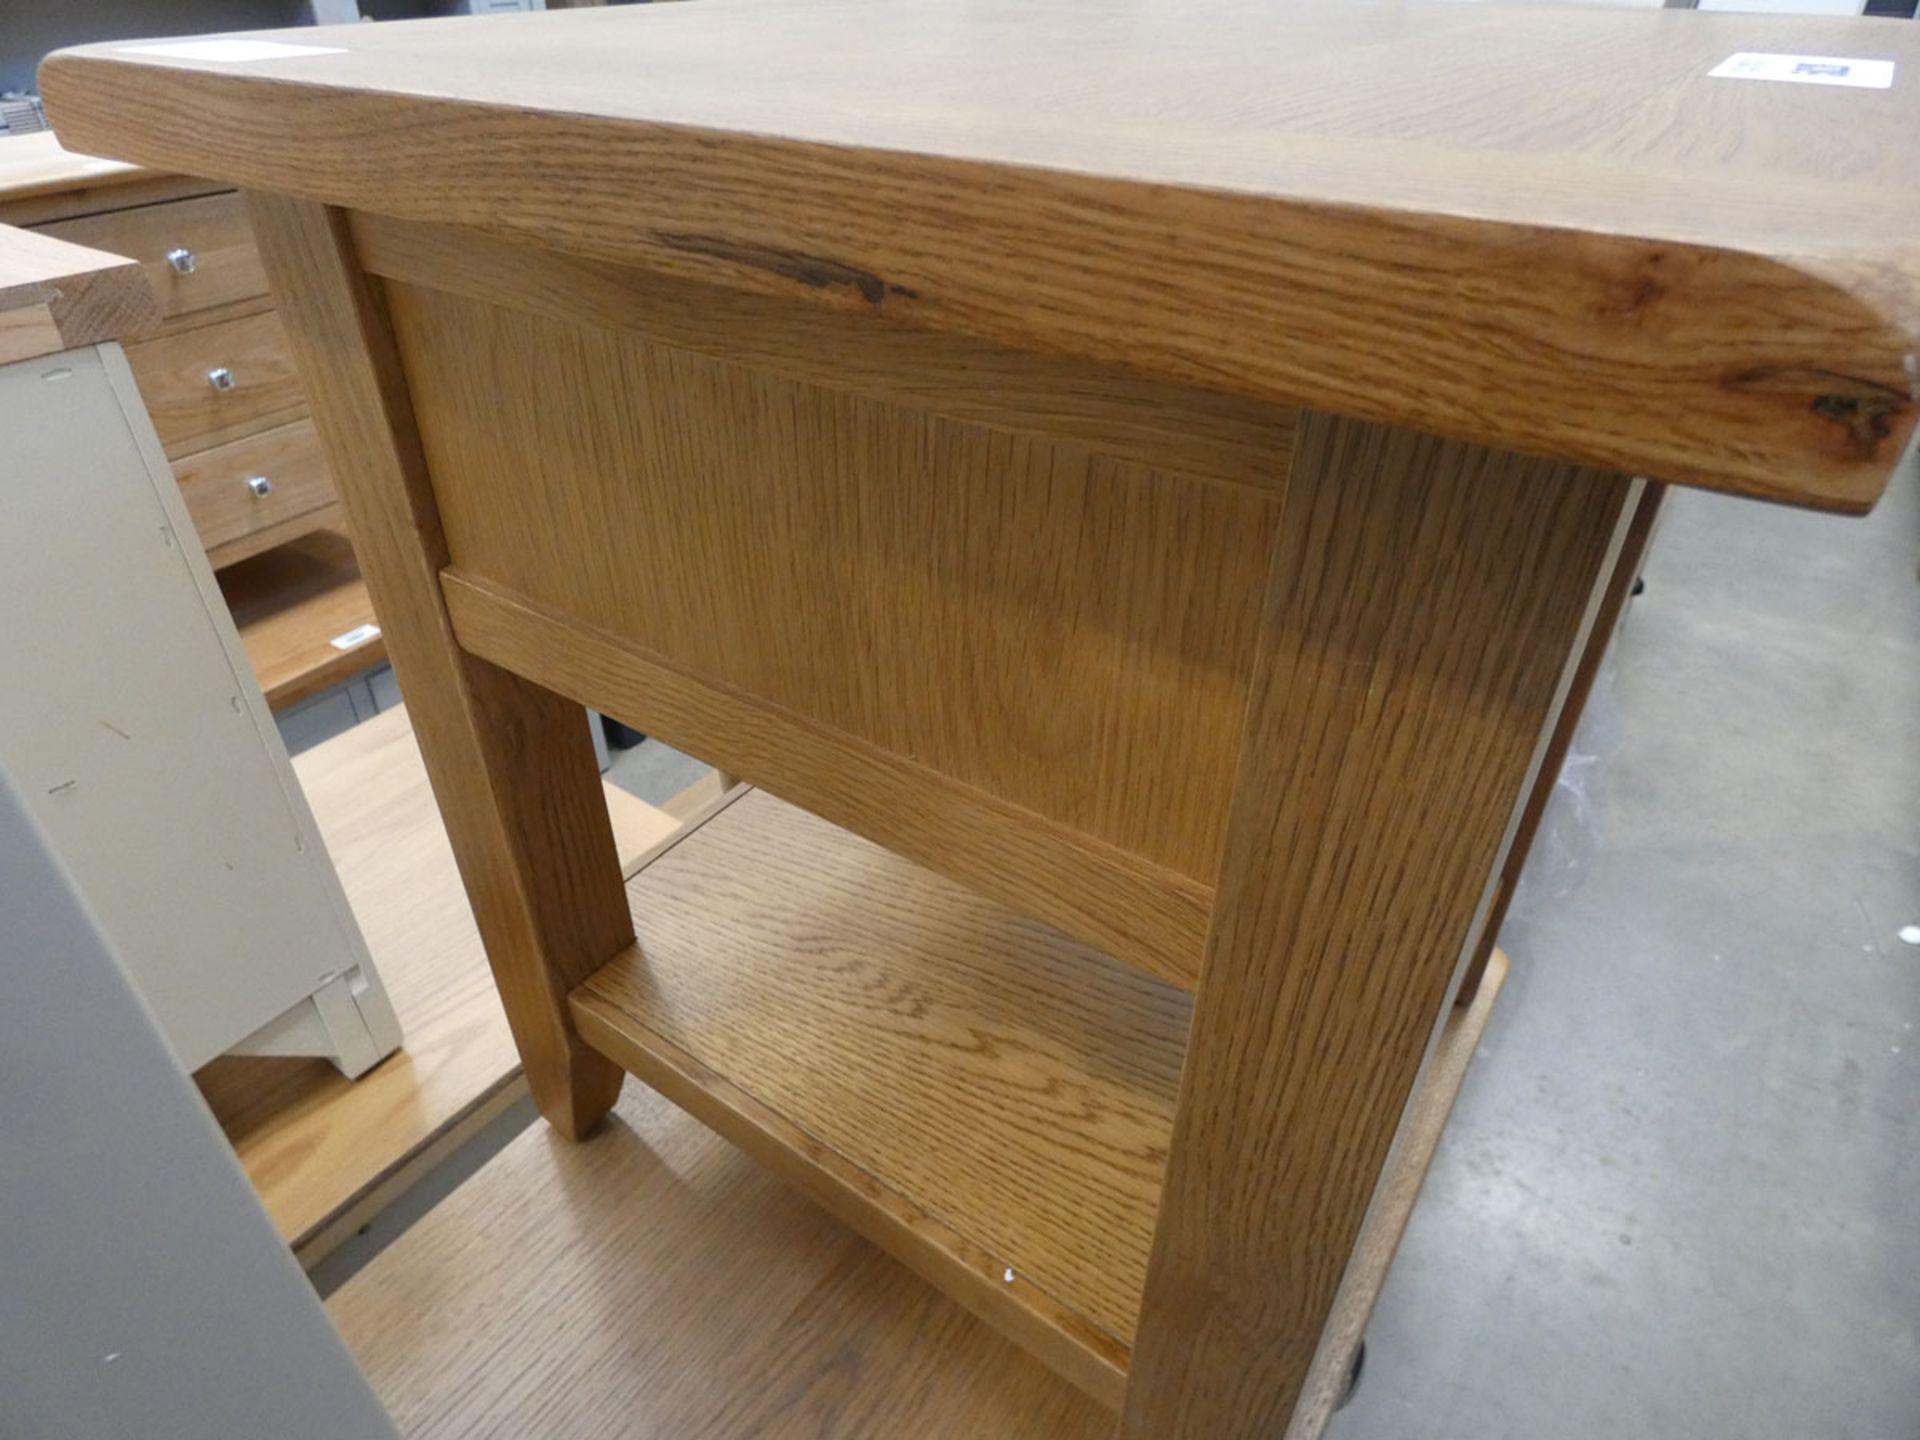 Oak lamp table with shelf under (16) - Image 4 of 4